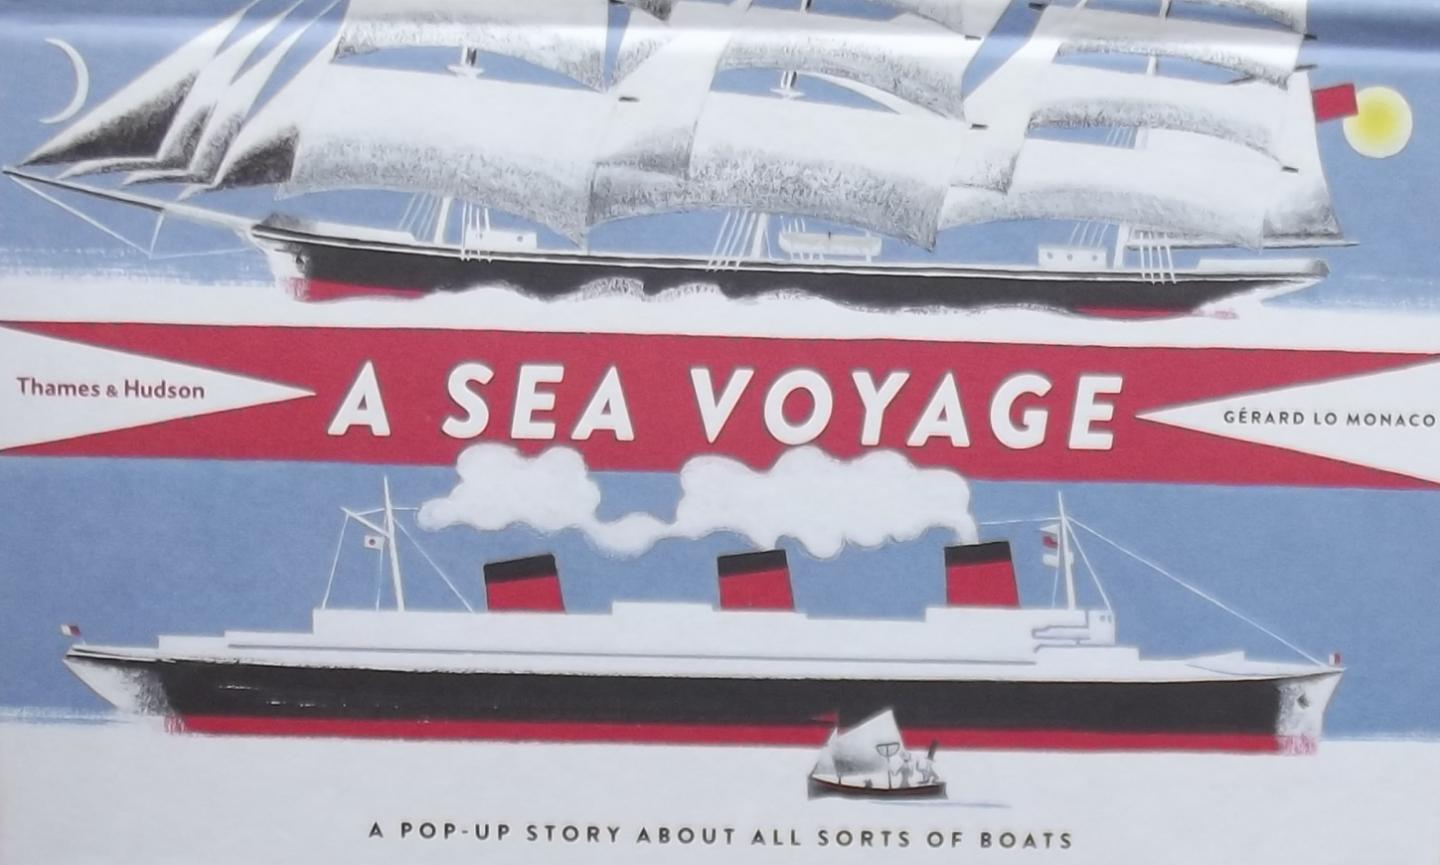 Gerard Lo Monaco - A Sea Voyage / A Pop-up Story About All Sorts of Boats